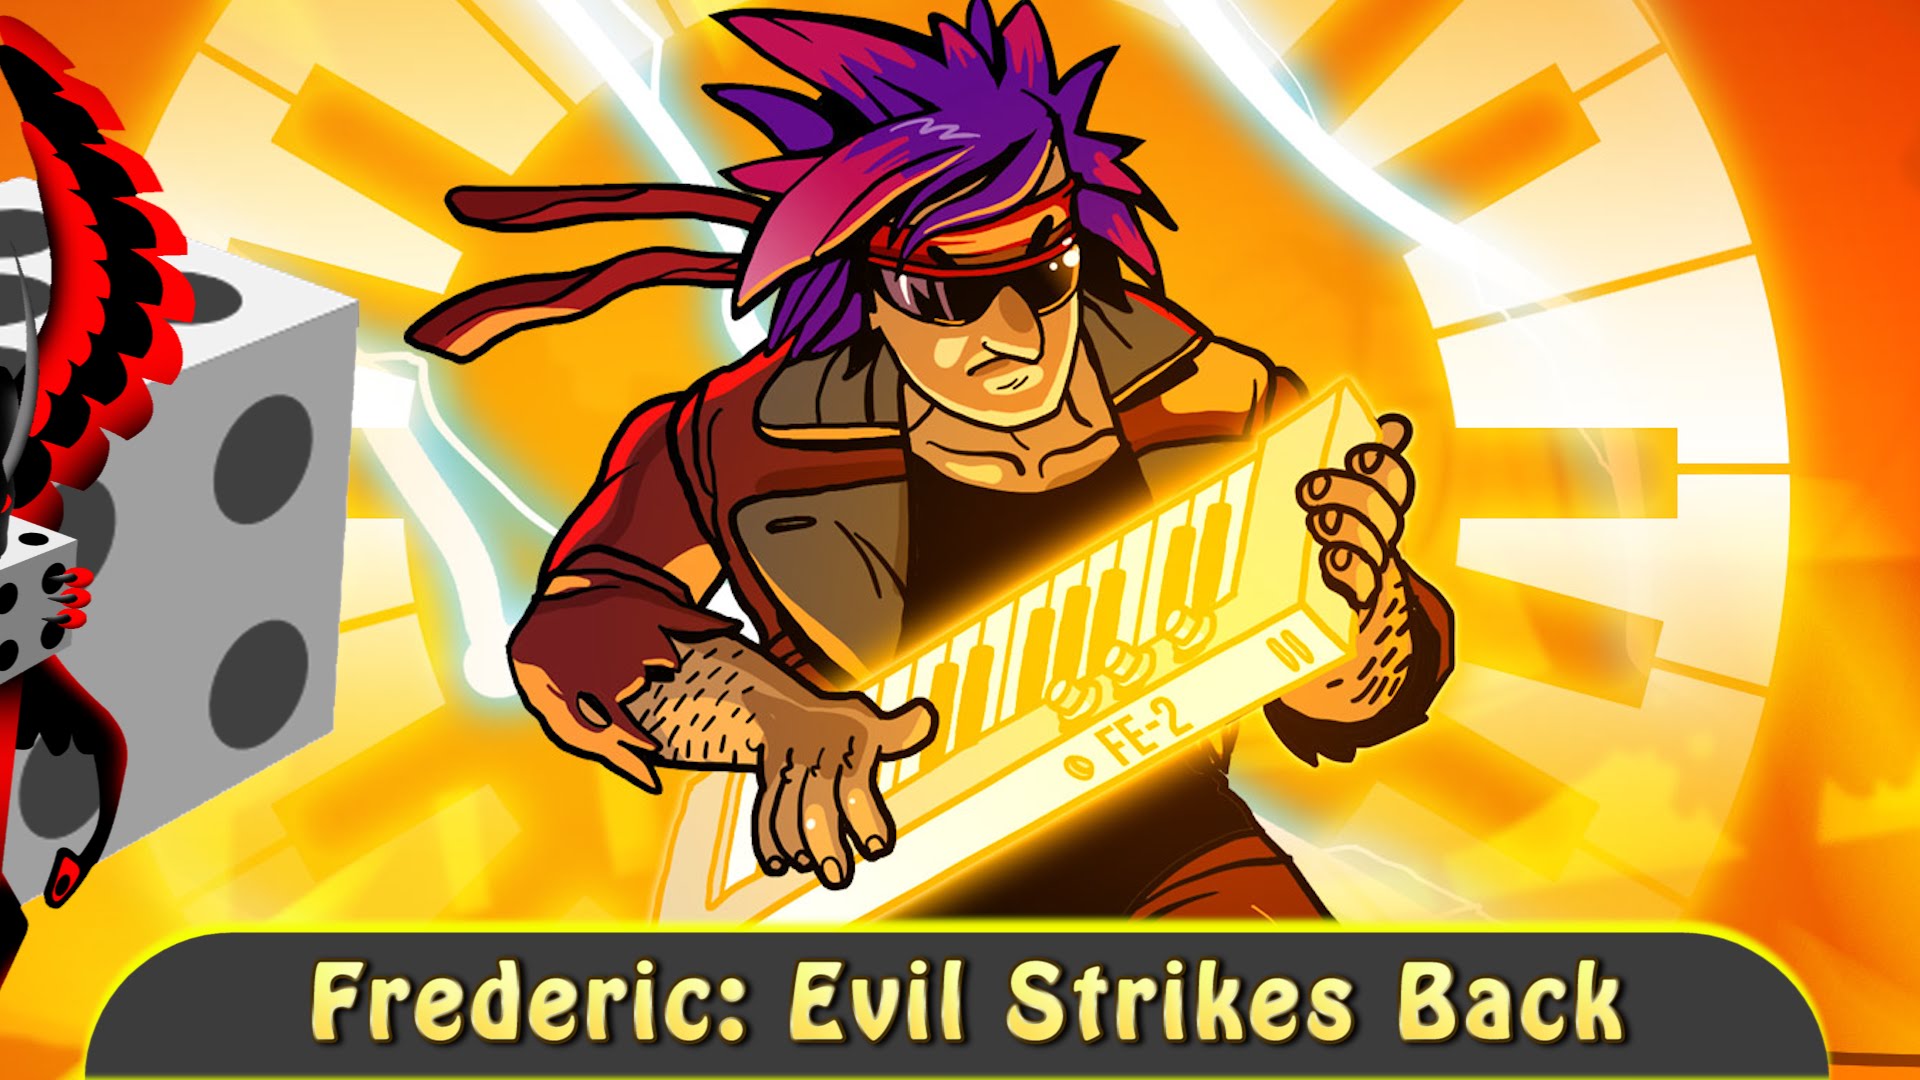 1920x1080 > Frederic: Evil Strikes Back Wallpapers